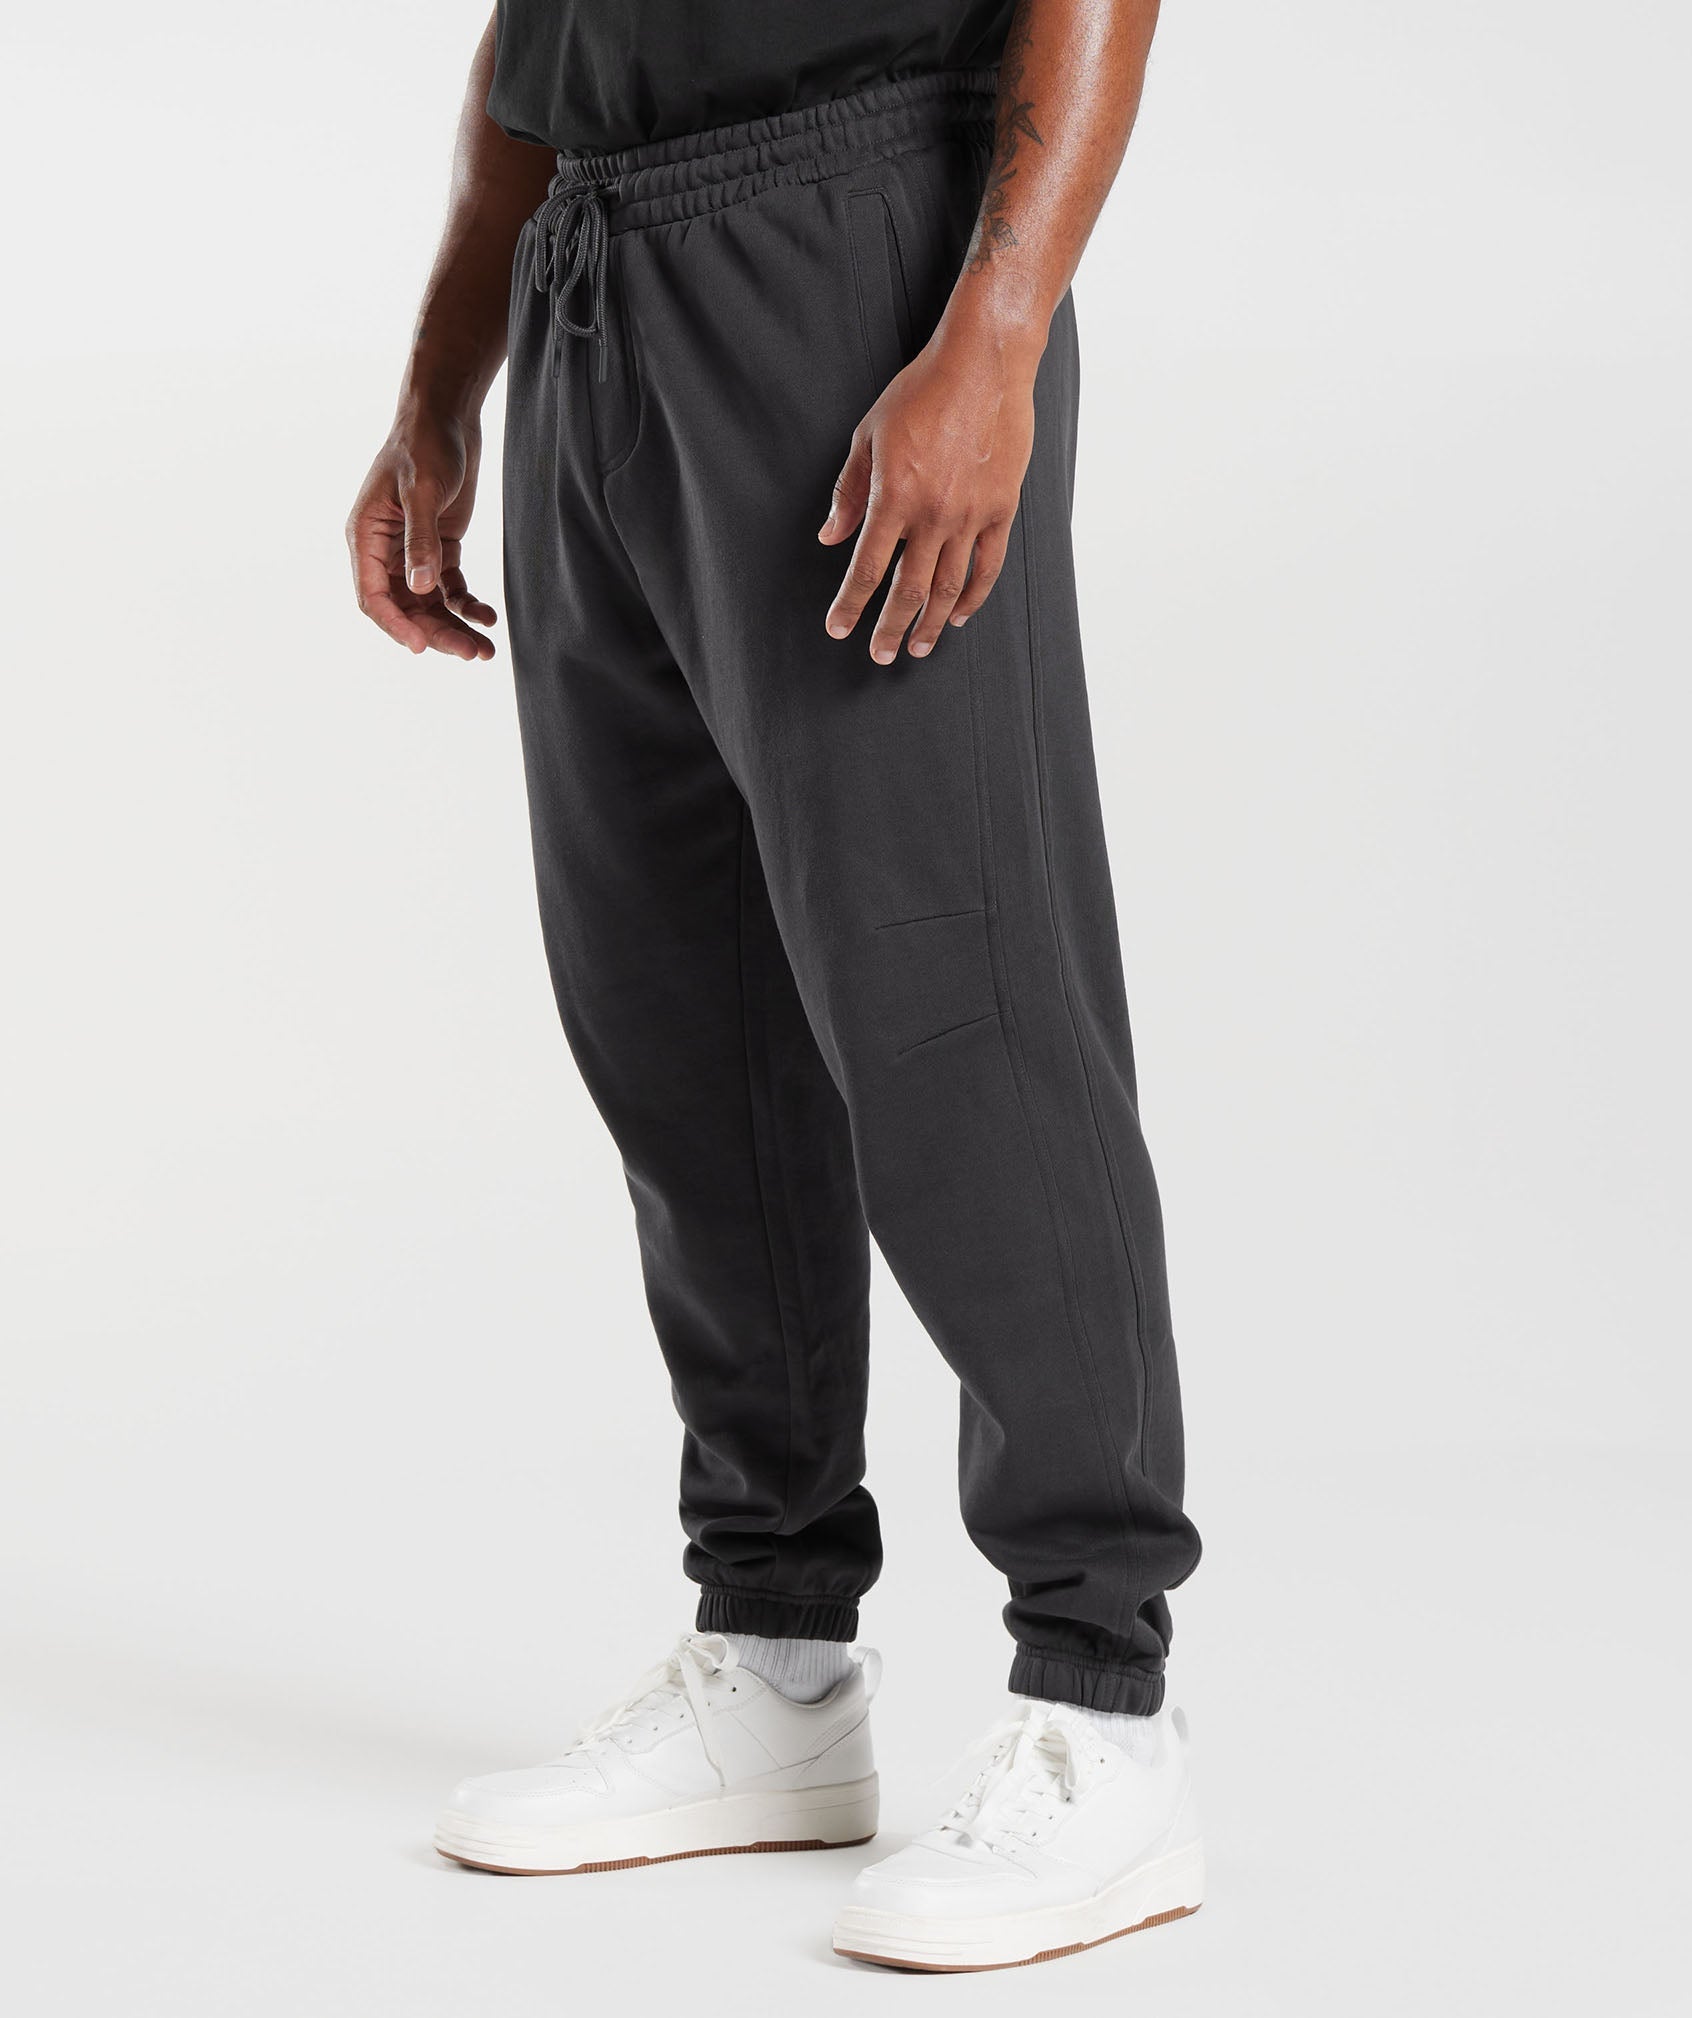 Rest Day Essentials Joggers in Onyx Grey - view 3